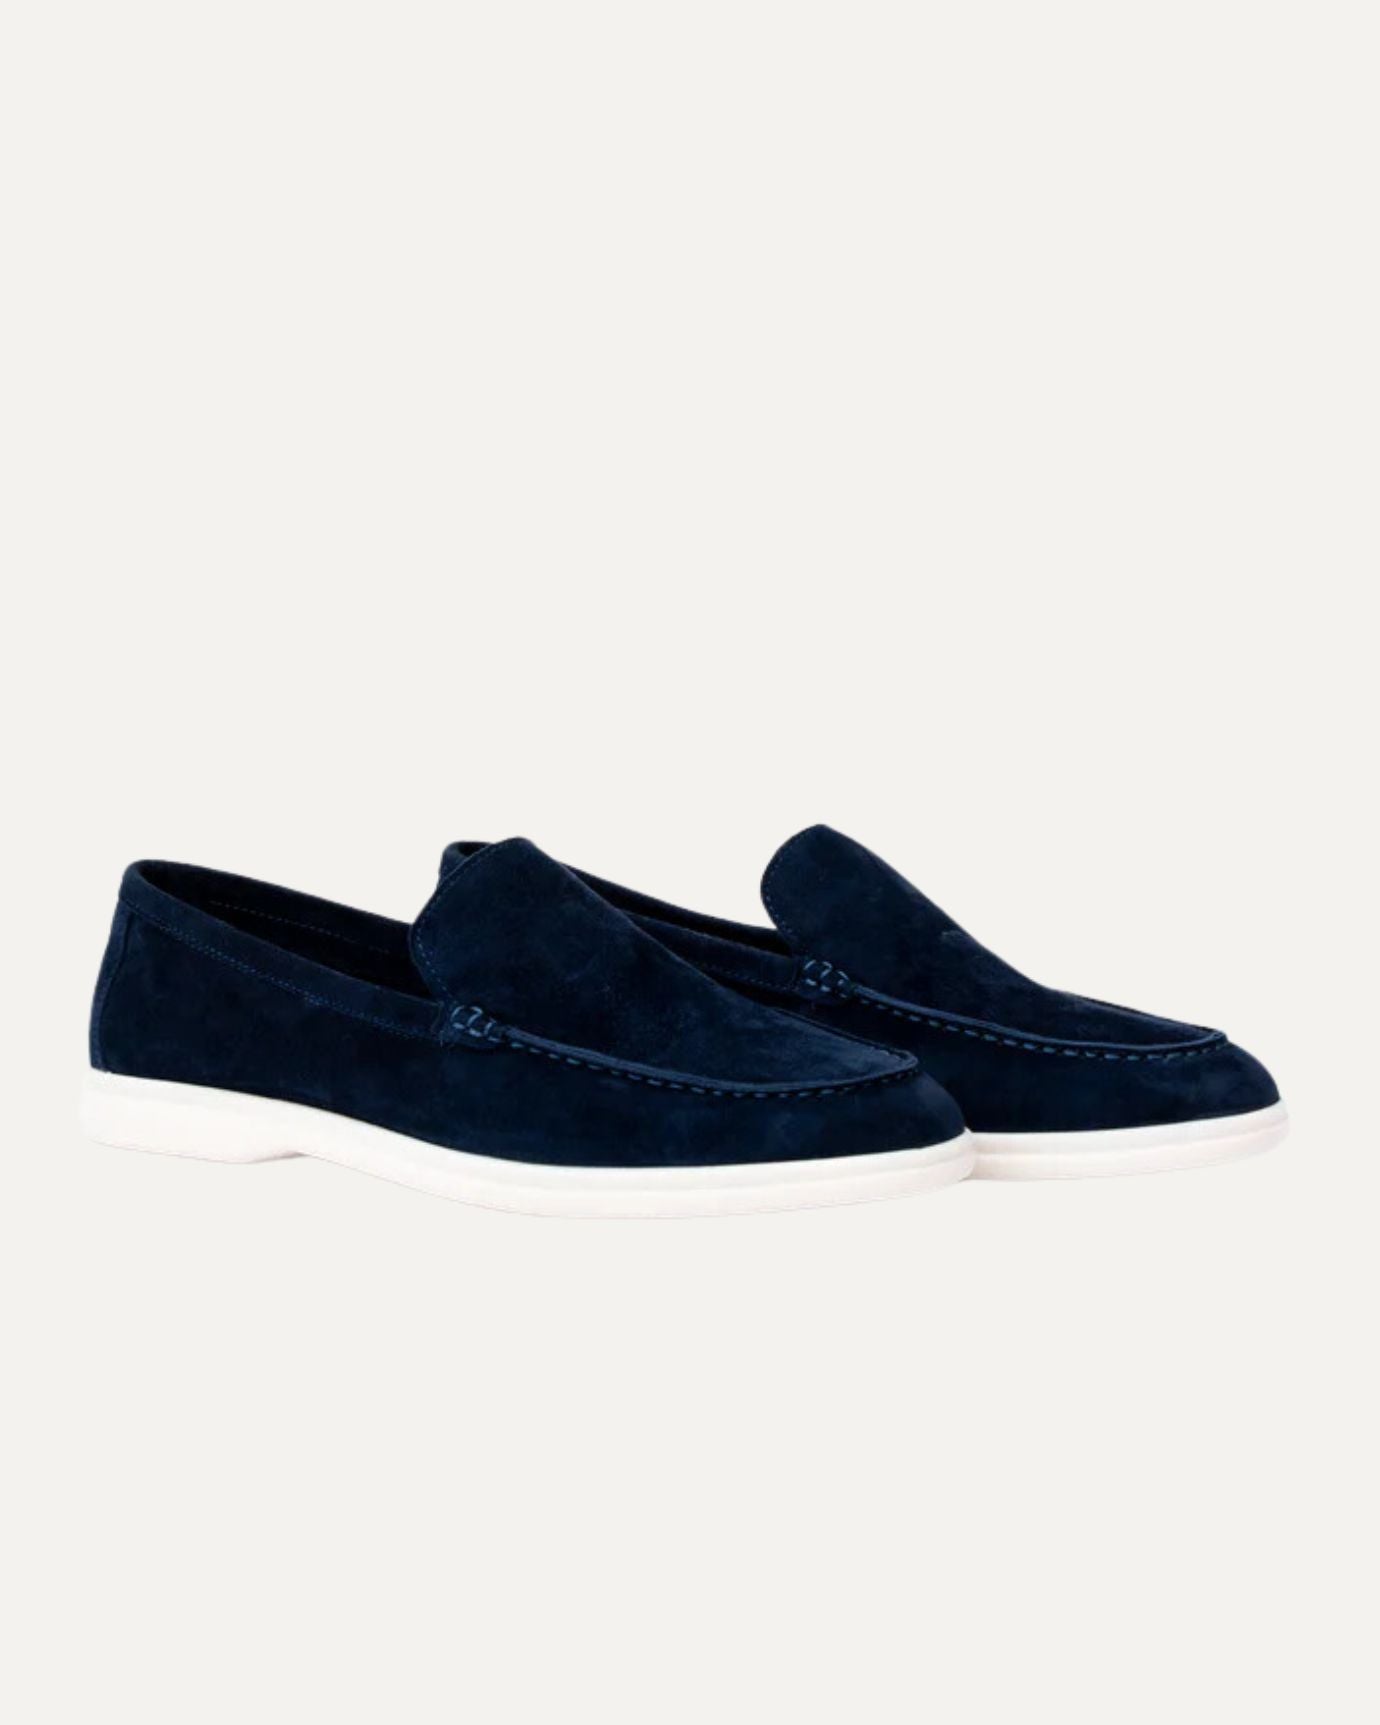 Lovau Portofino Suede Old Money Loafers Leather - Navy Blue